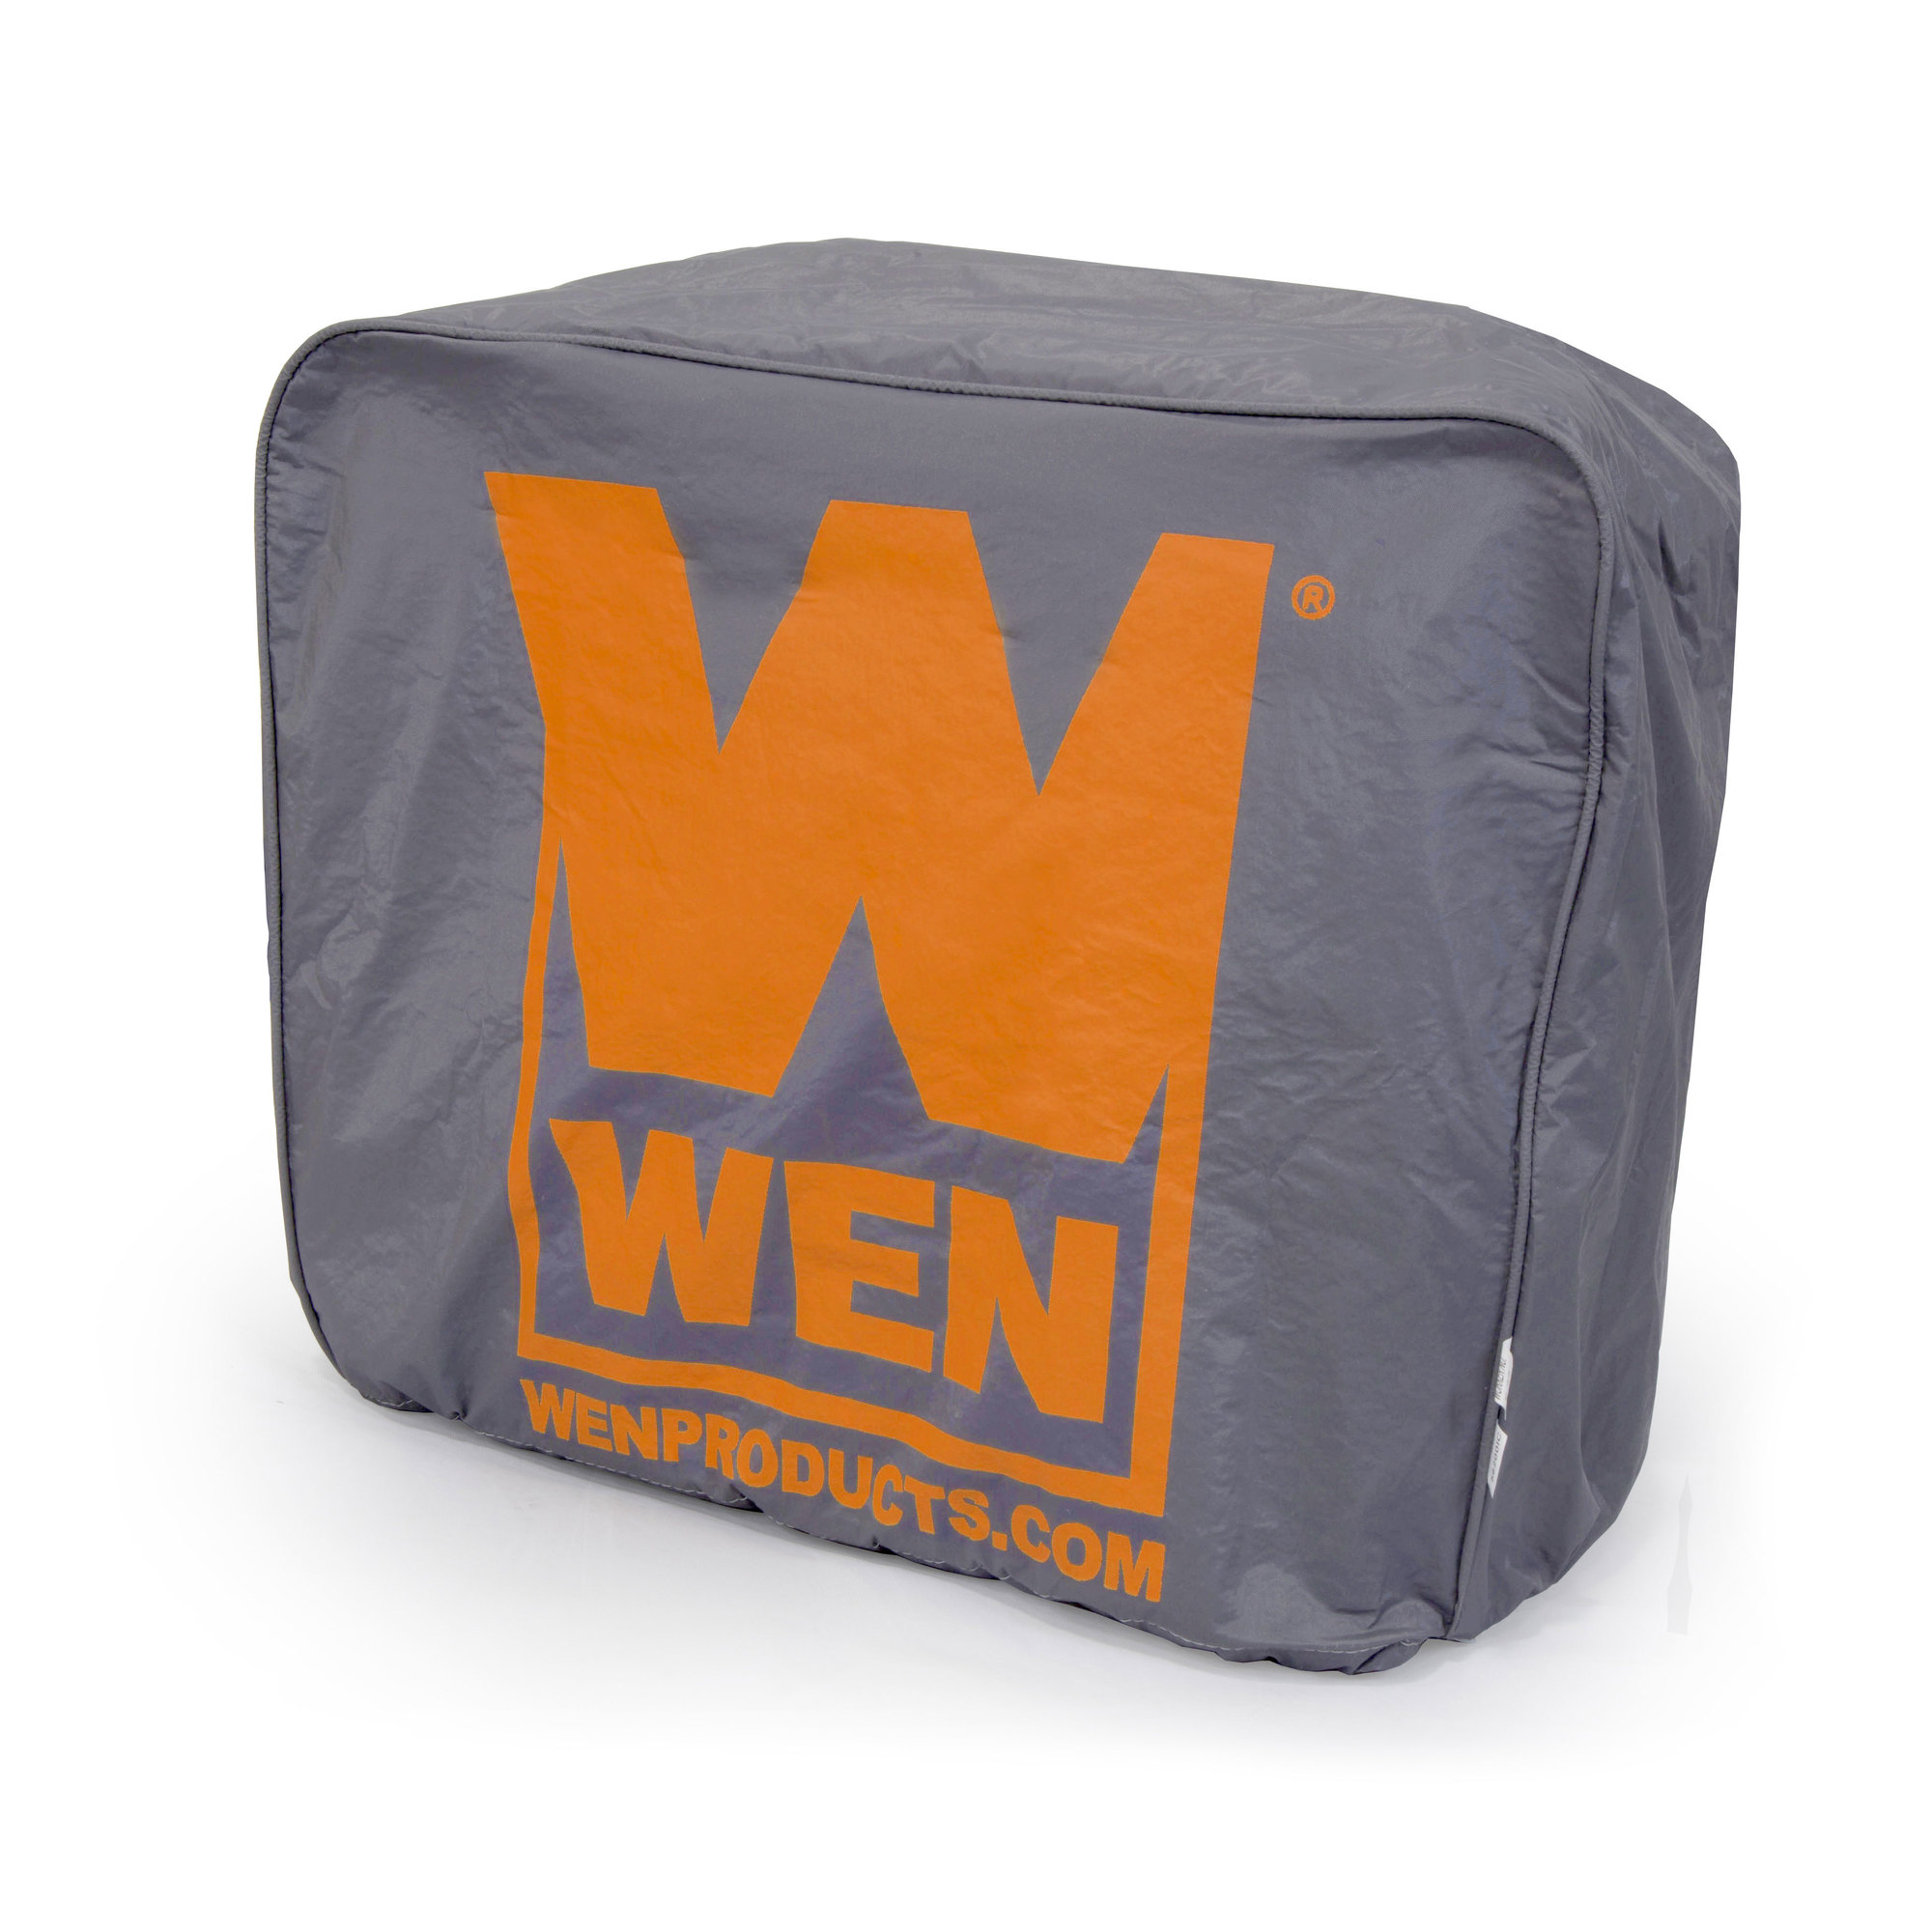 WEN, Weatherproof Medium Inverter Generator Cover, Material Vinyl, Closure Type Other, Compatible With Other, Model 56200iC